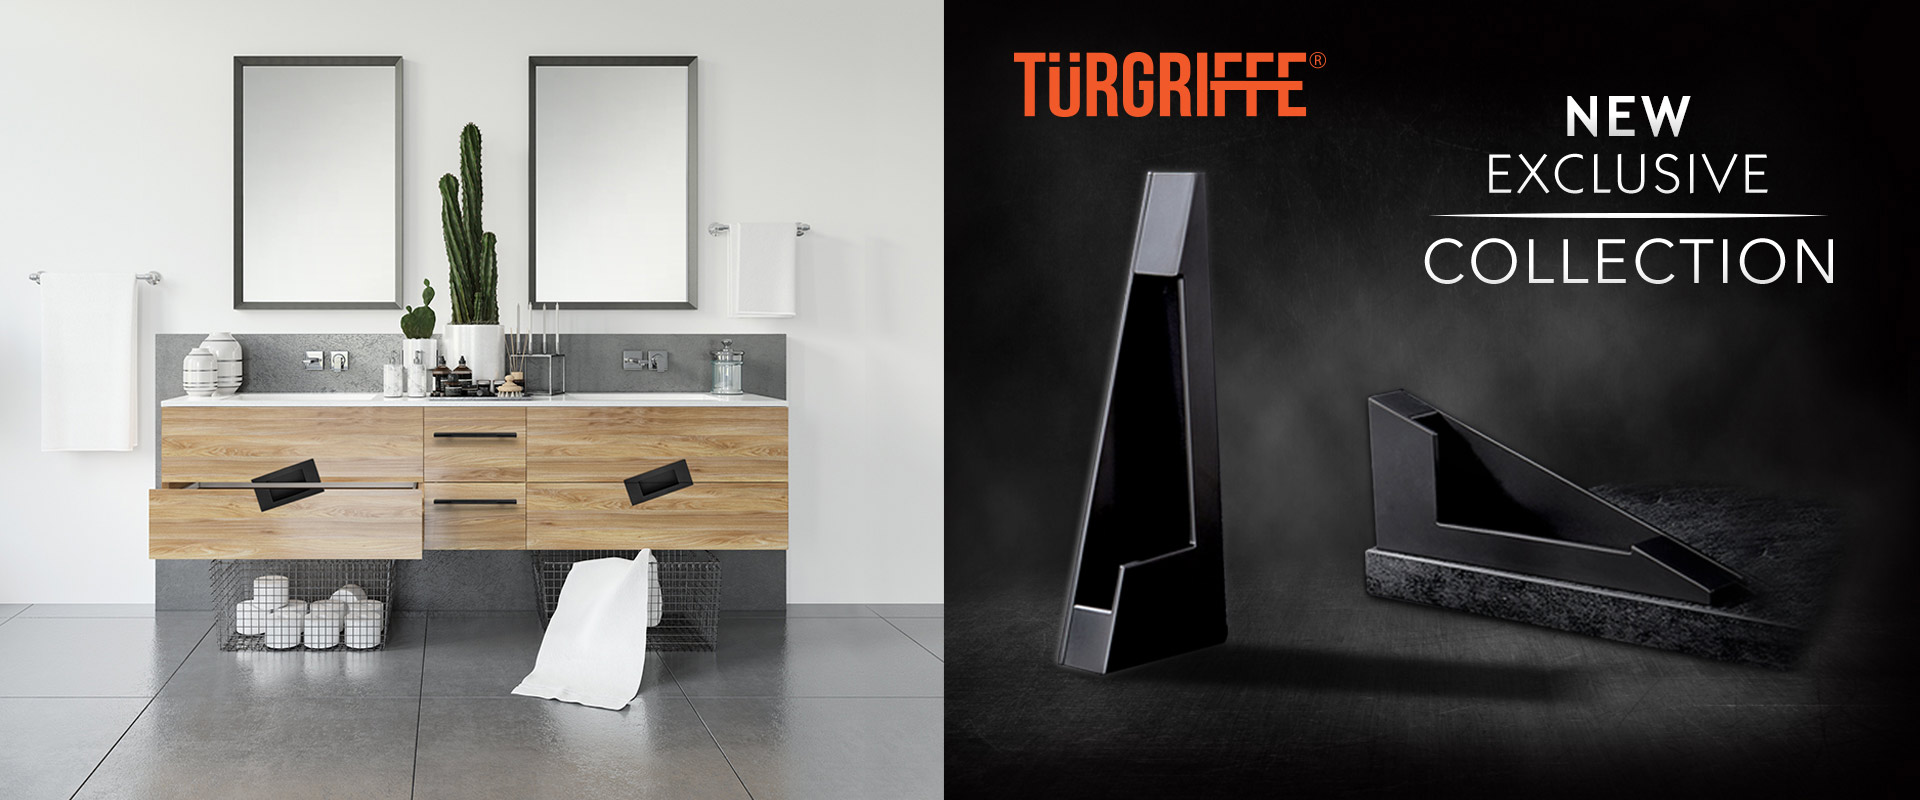 Exclusive-Collection-TURGRIFFE | Jako-Hardware